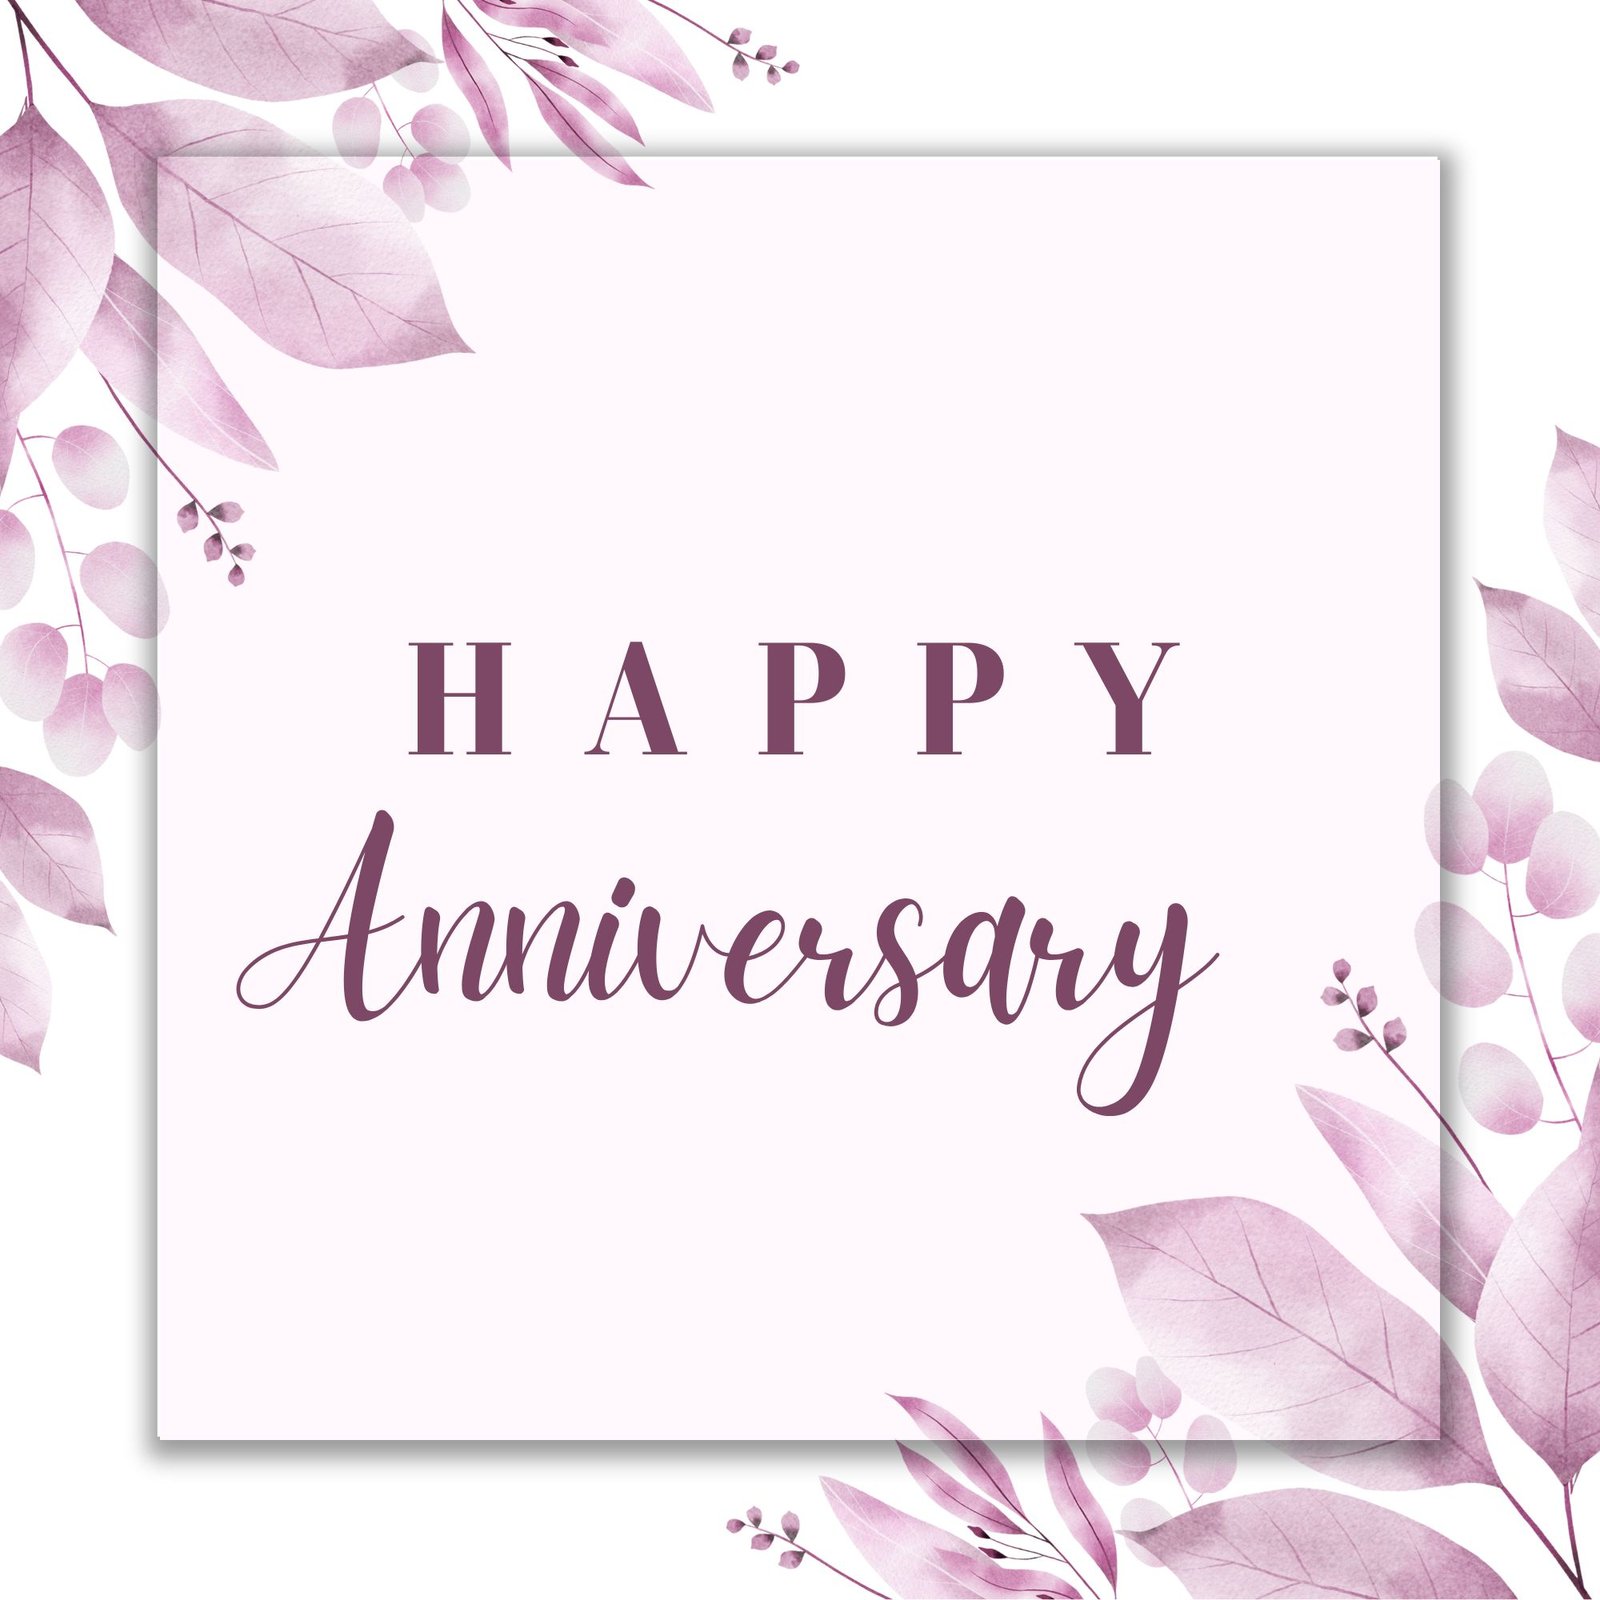 Happy Anniversary Images Free Download